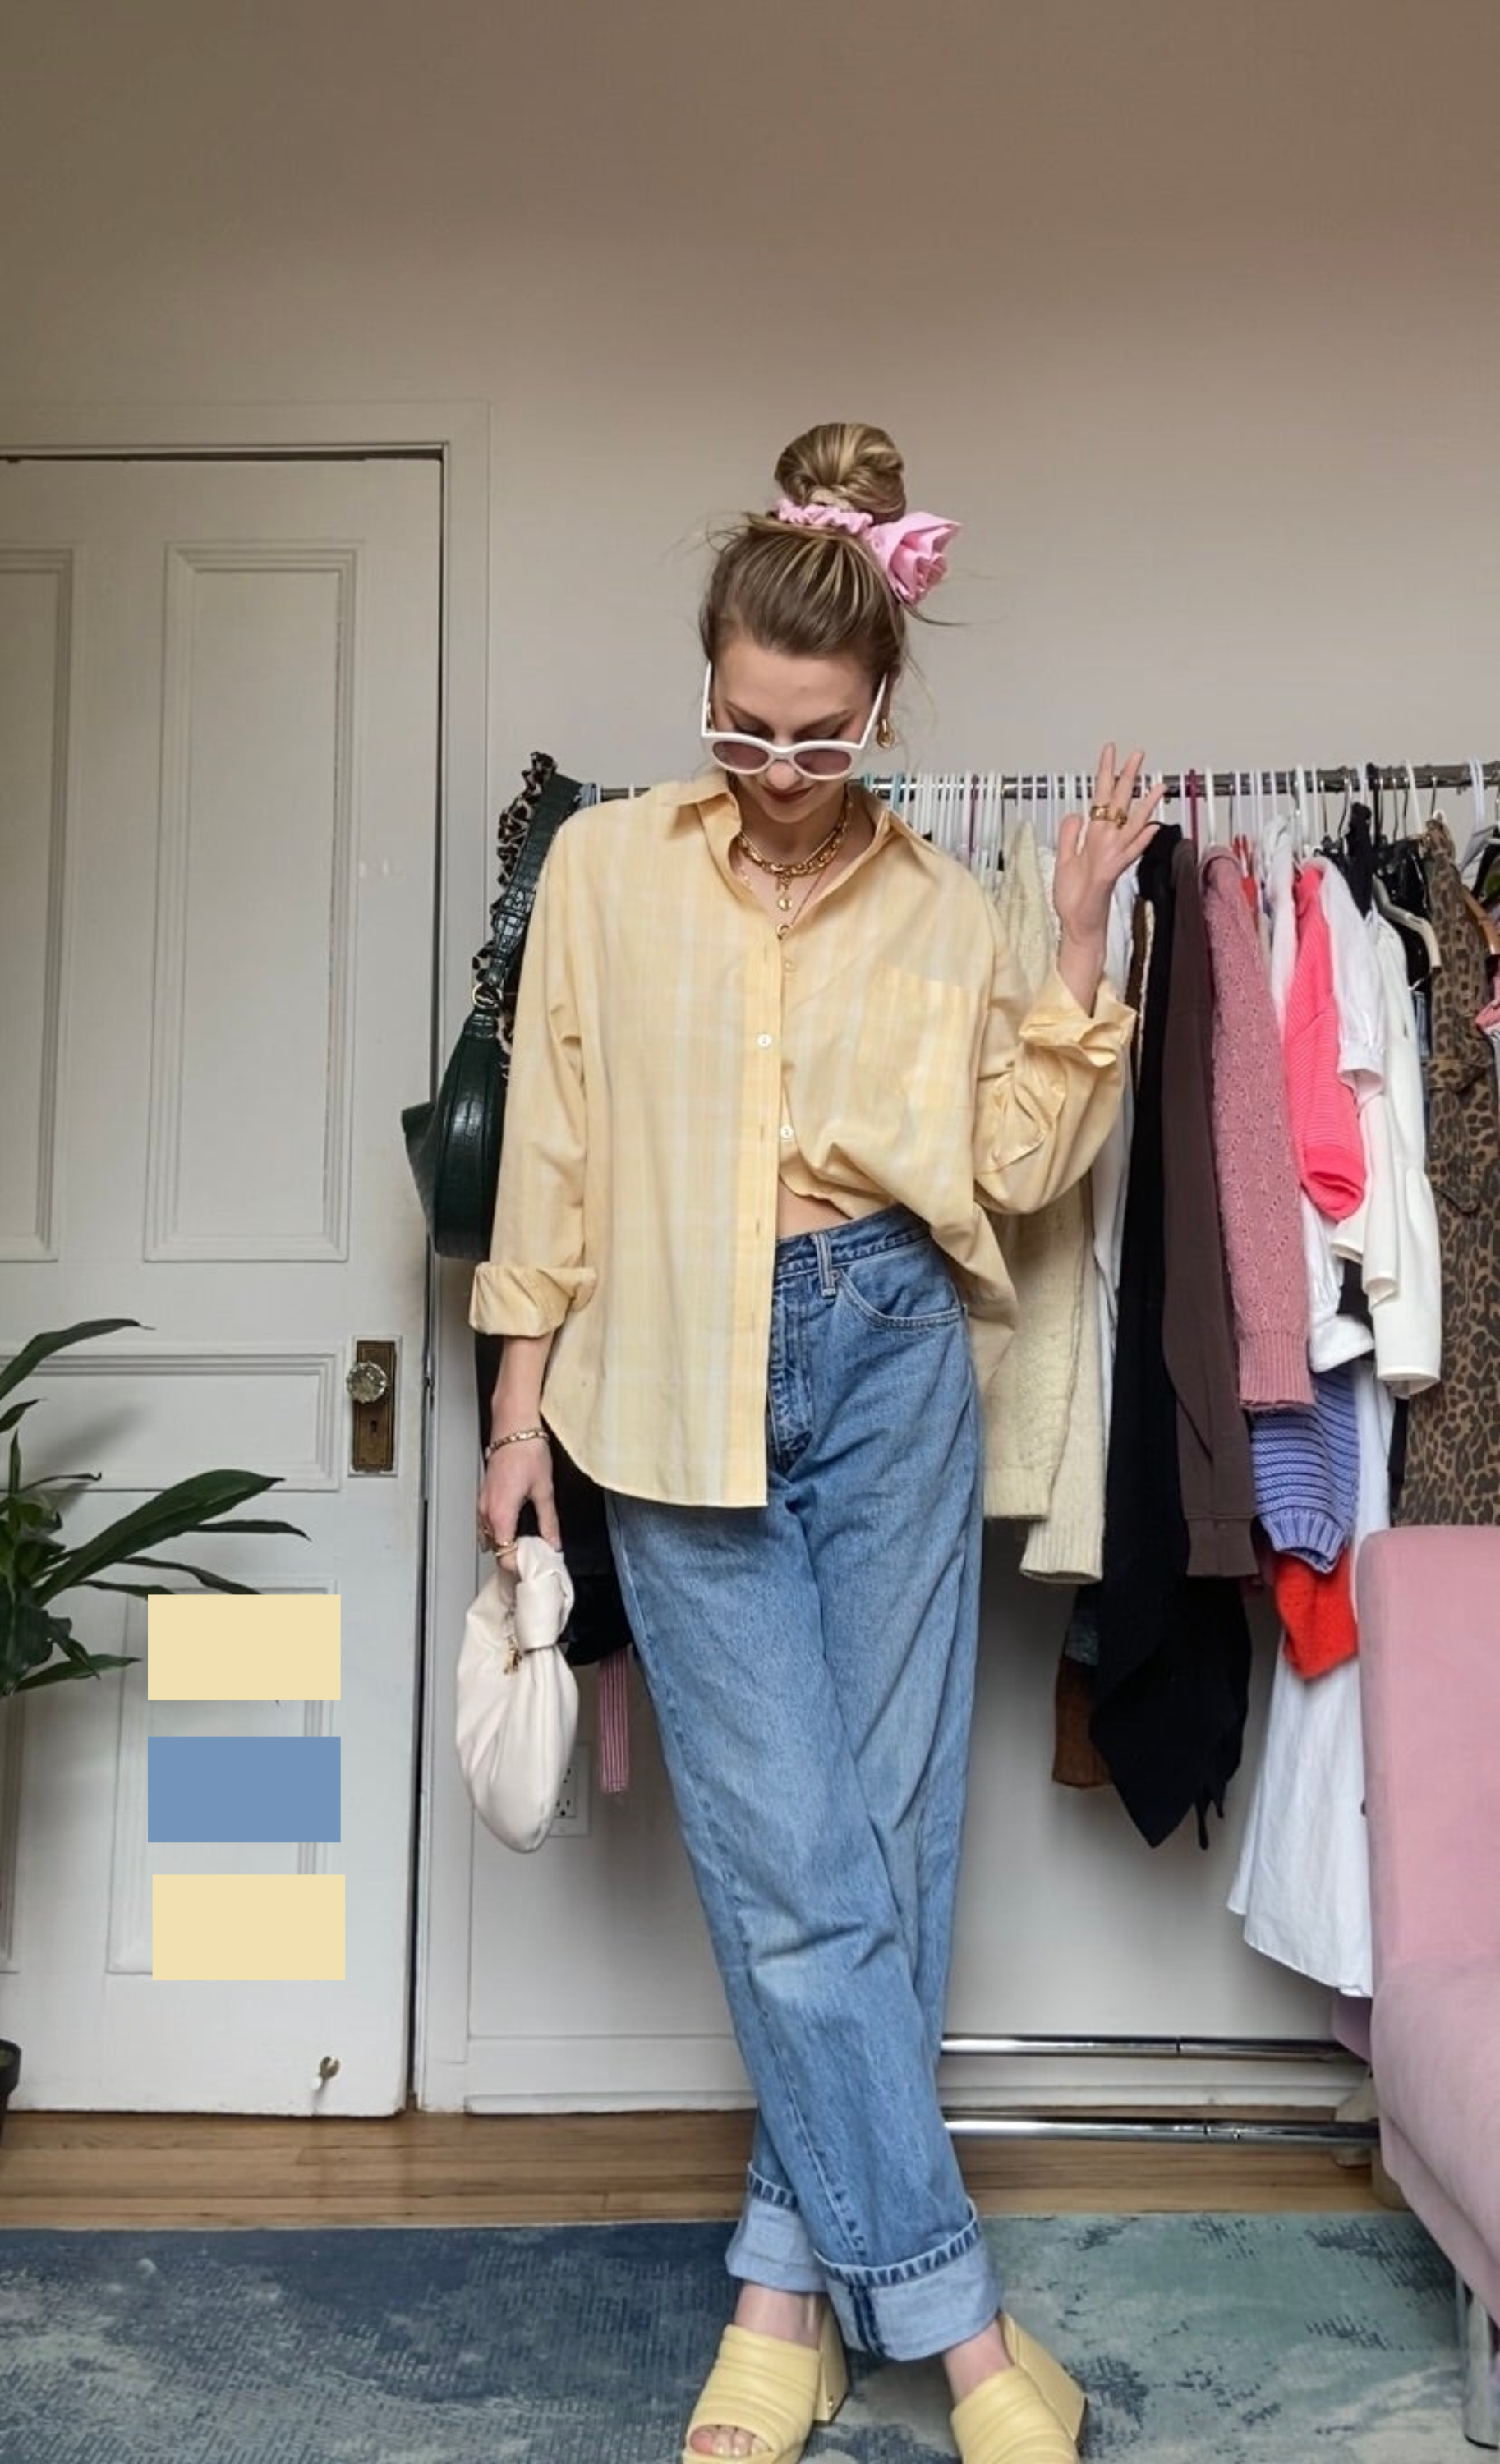 Person in a casual outfit with a yellow top, jeans, and sunglasses, posing in a room with a clothing rack